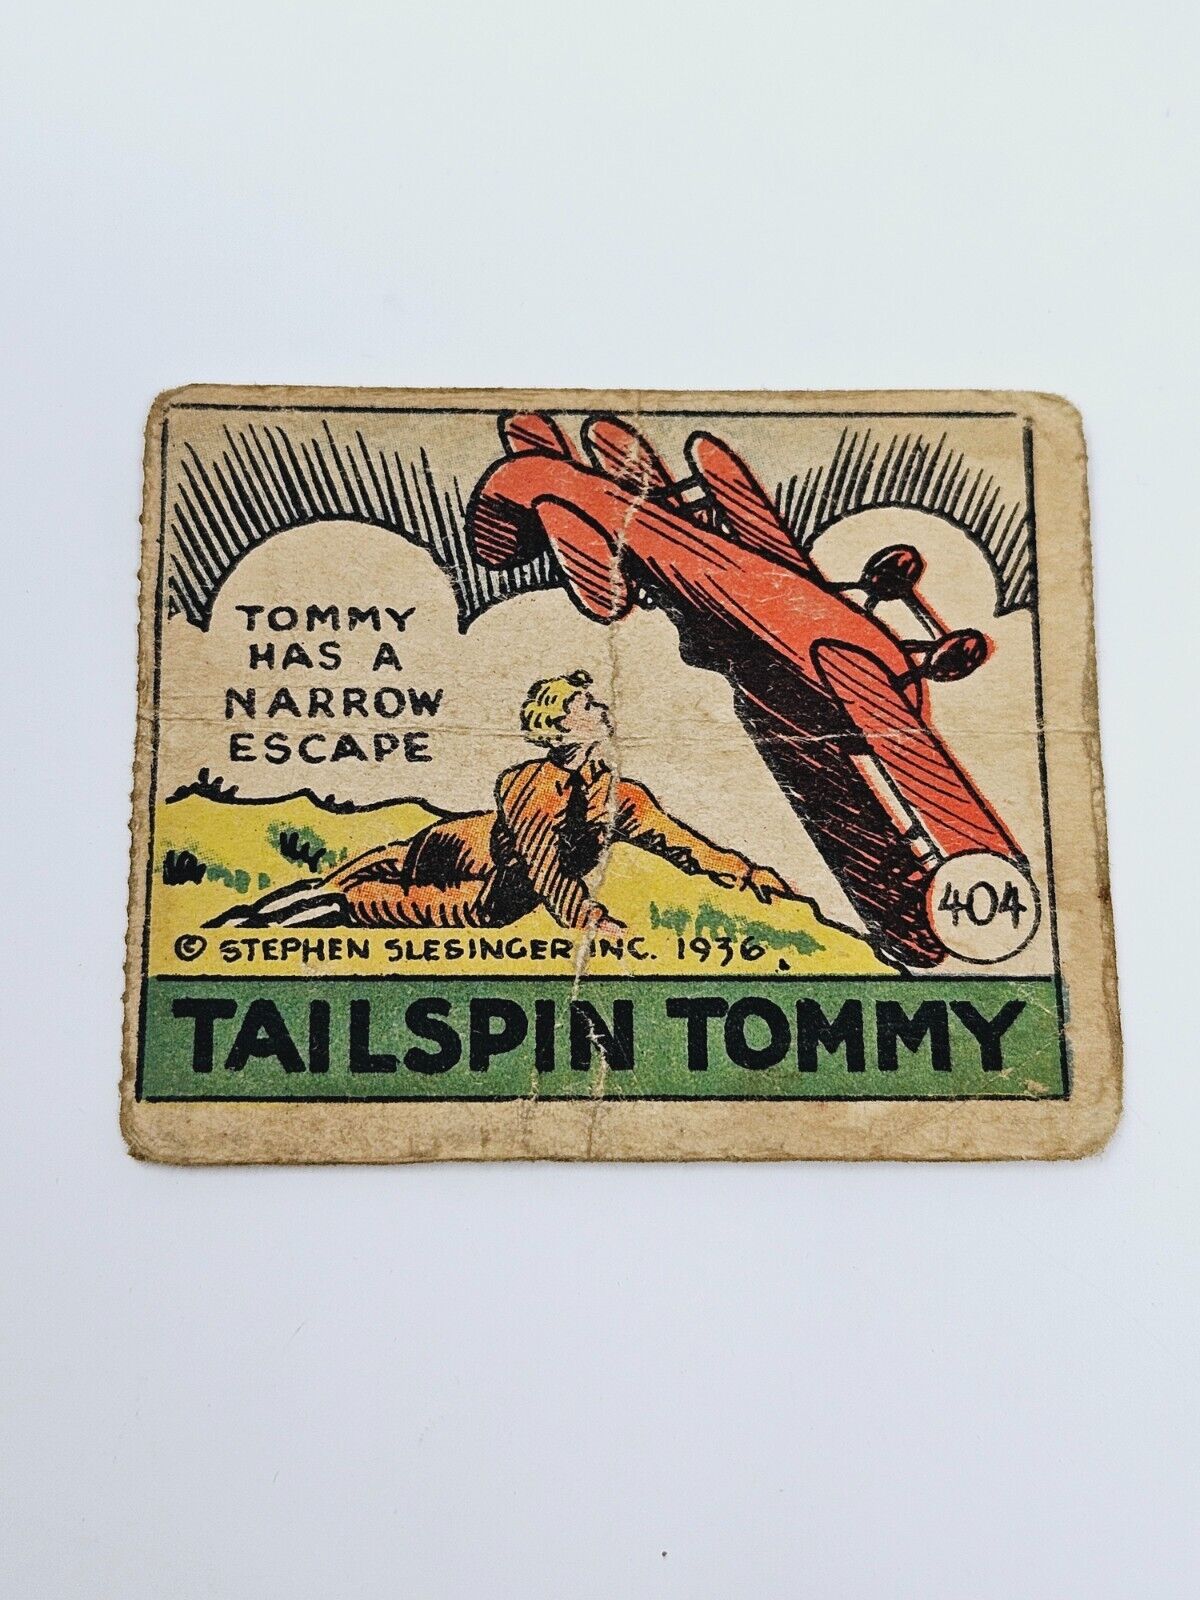 1936 TAILSPIN TOMMY 404 JEWELS CHRIS BENJAMIN PRICE GUIDE PUBLISHED CARD 